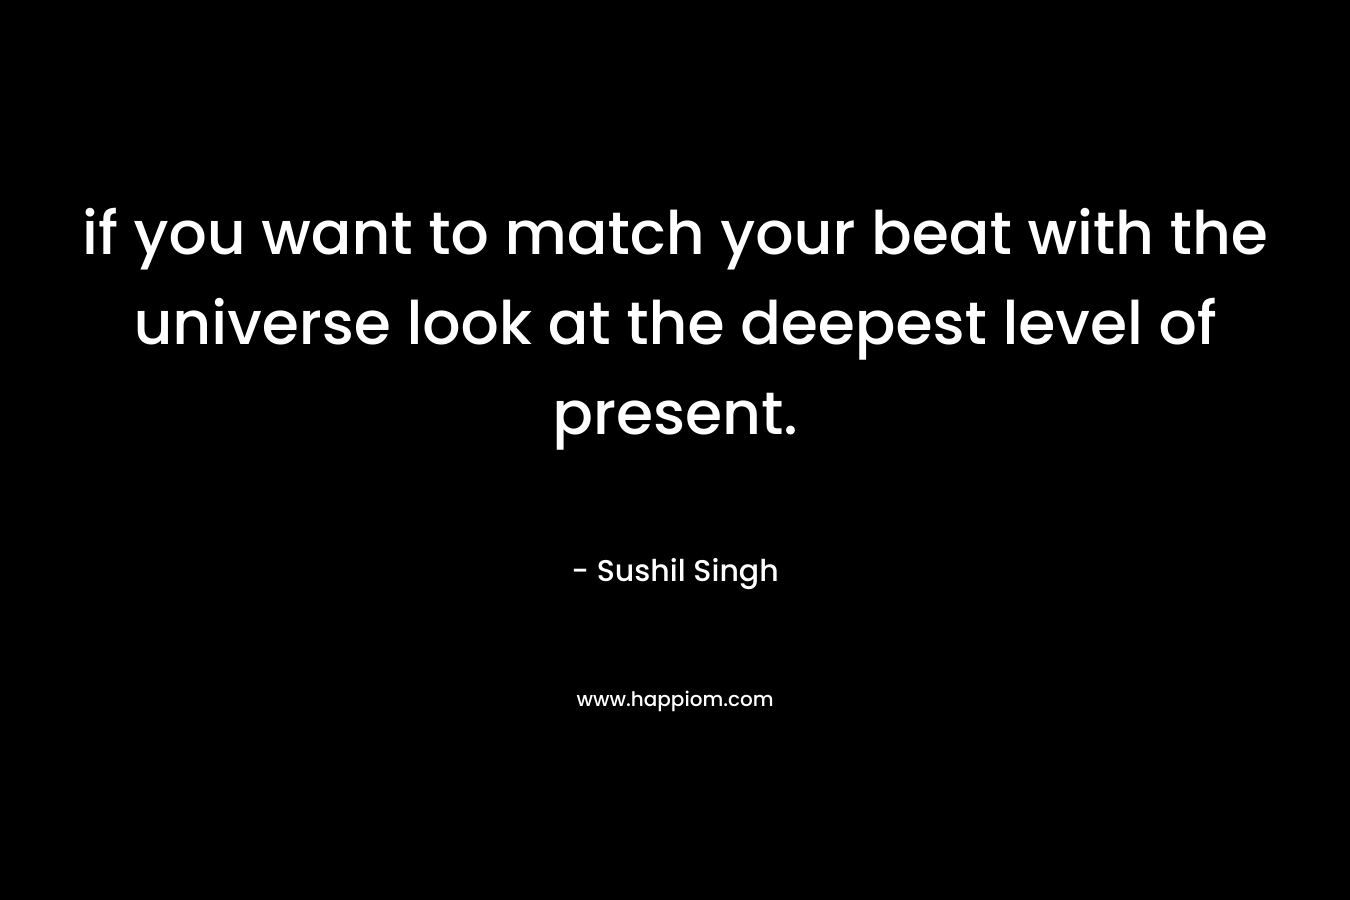 if you want to match your beat with the universe look at the deepest level of present.